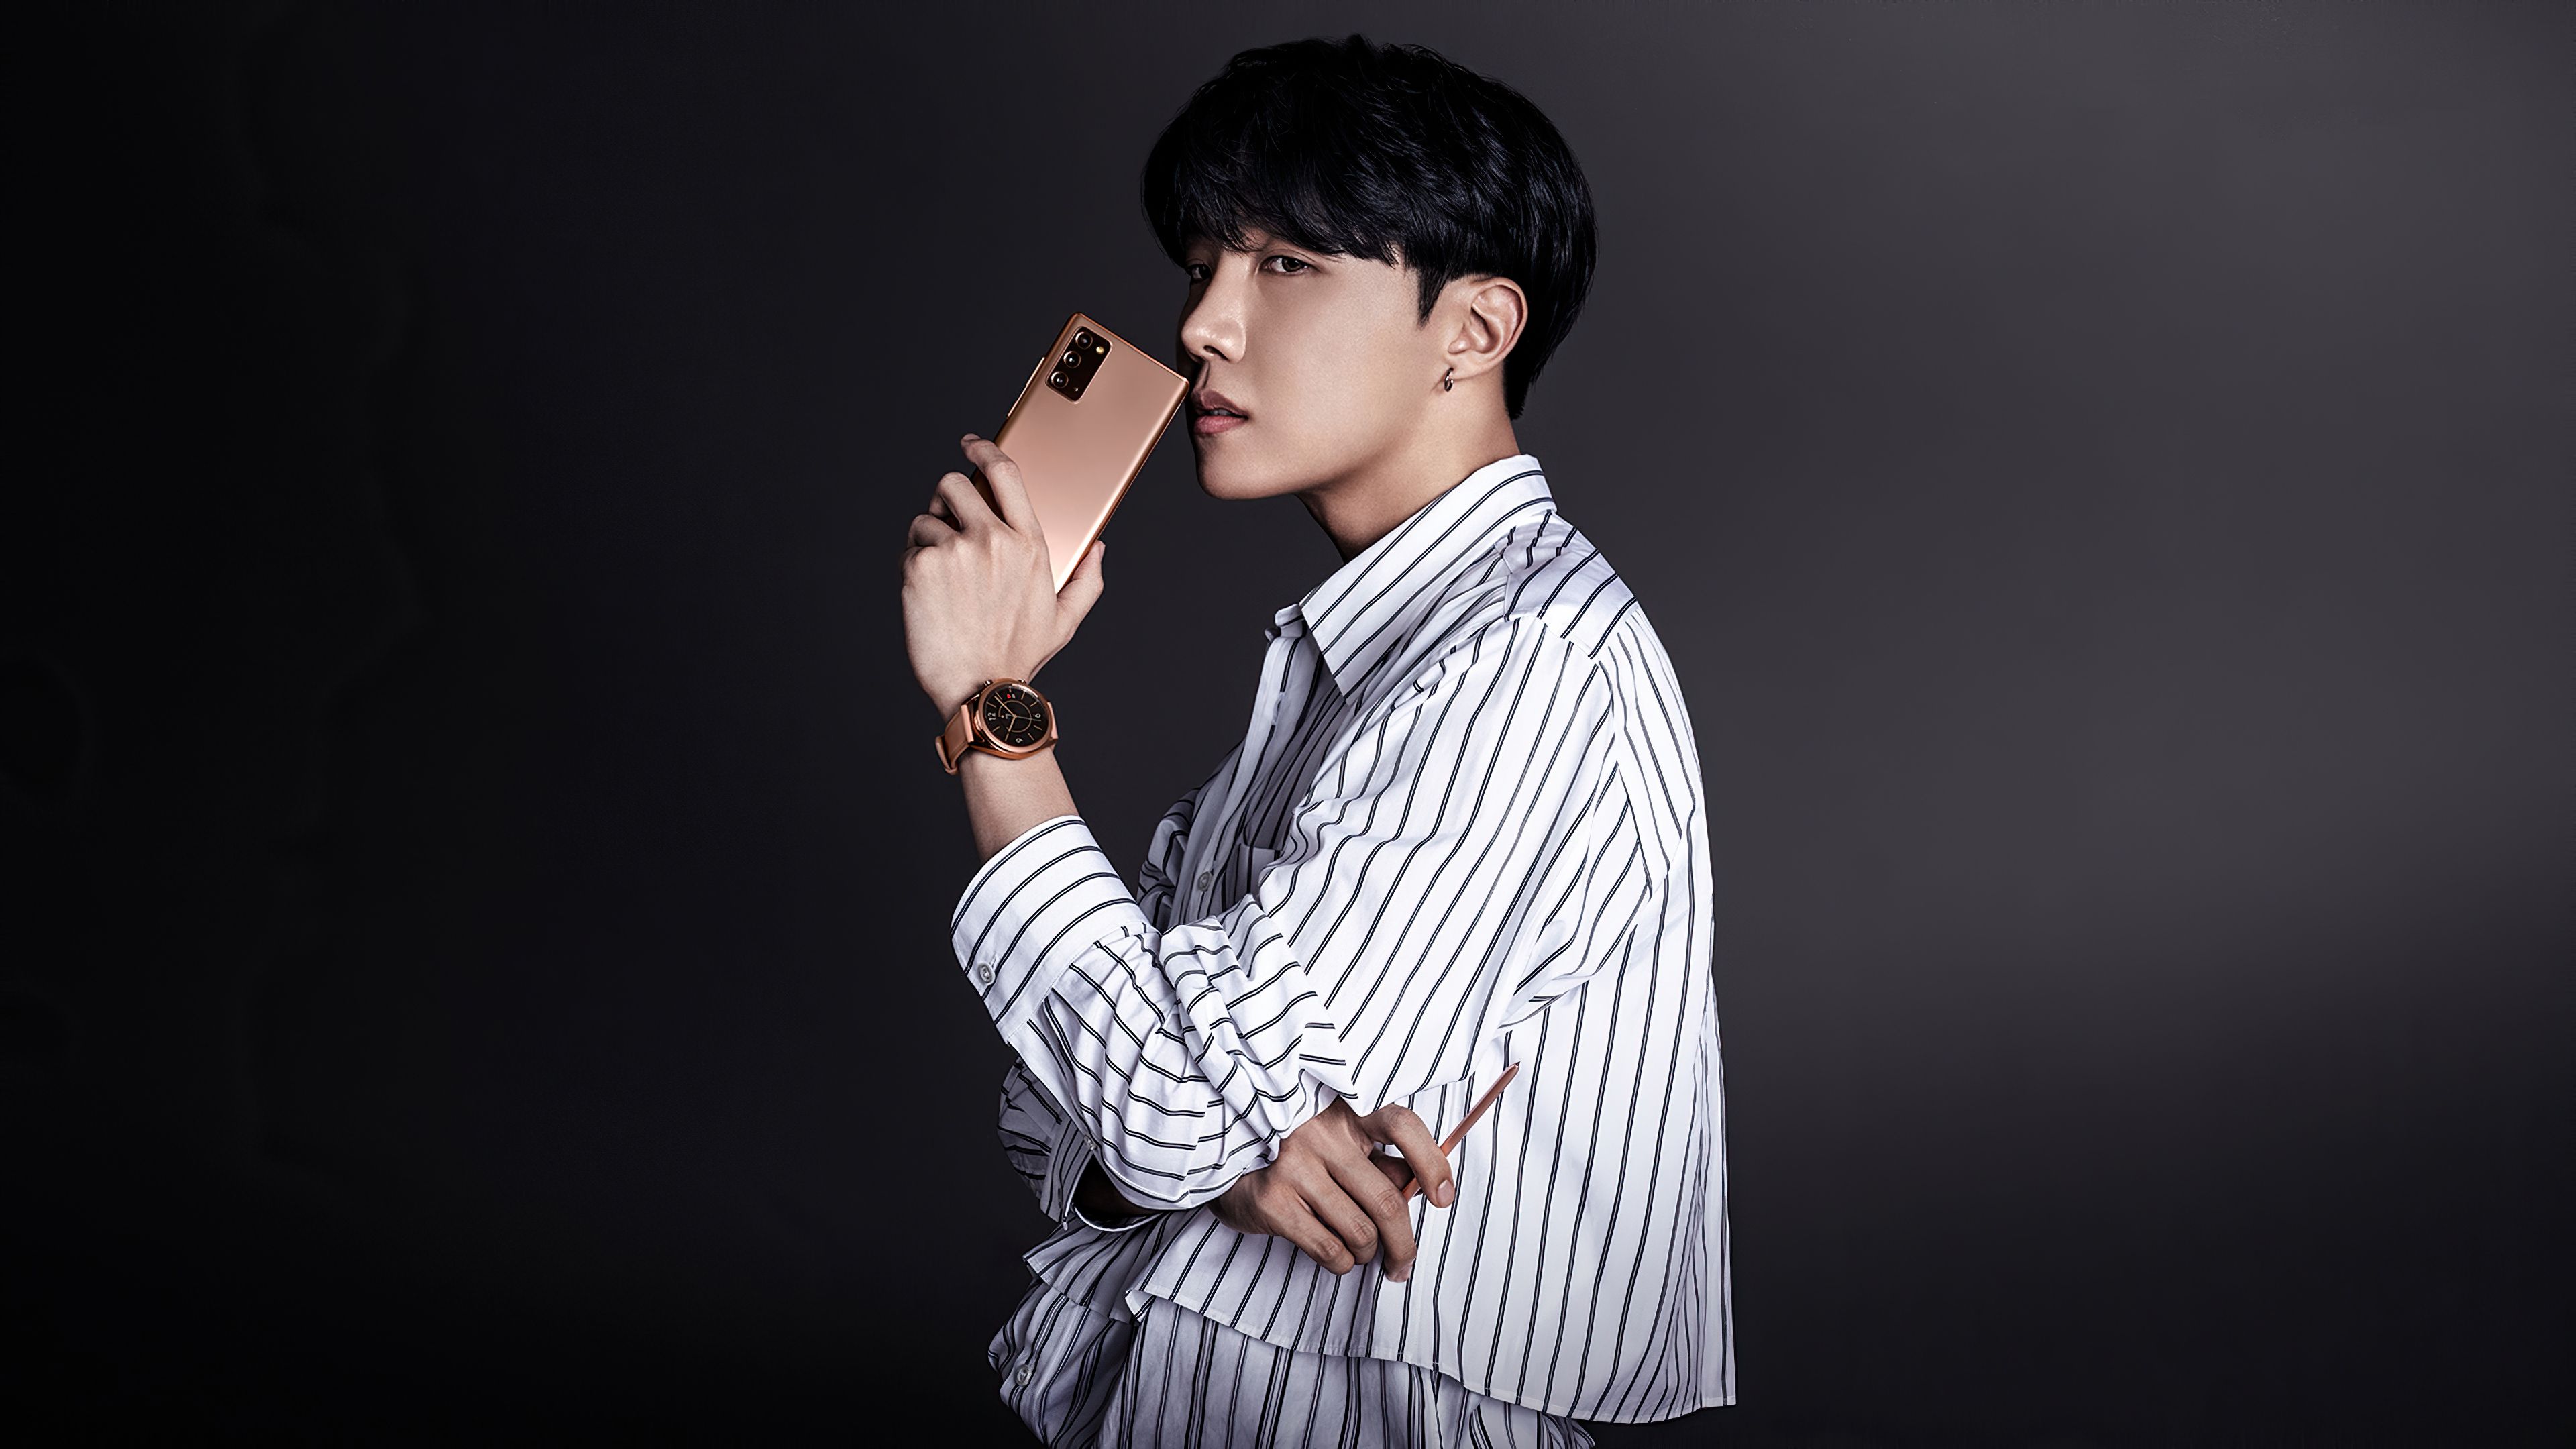 2048x2048 BTS J Hope Ipad Air HD 4k Wallpapers, Image, Backgrounds, Photos and Pictures